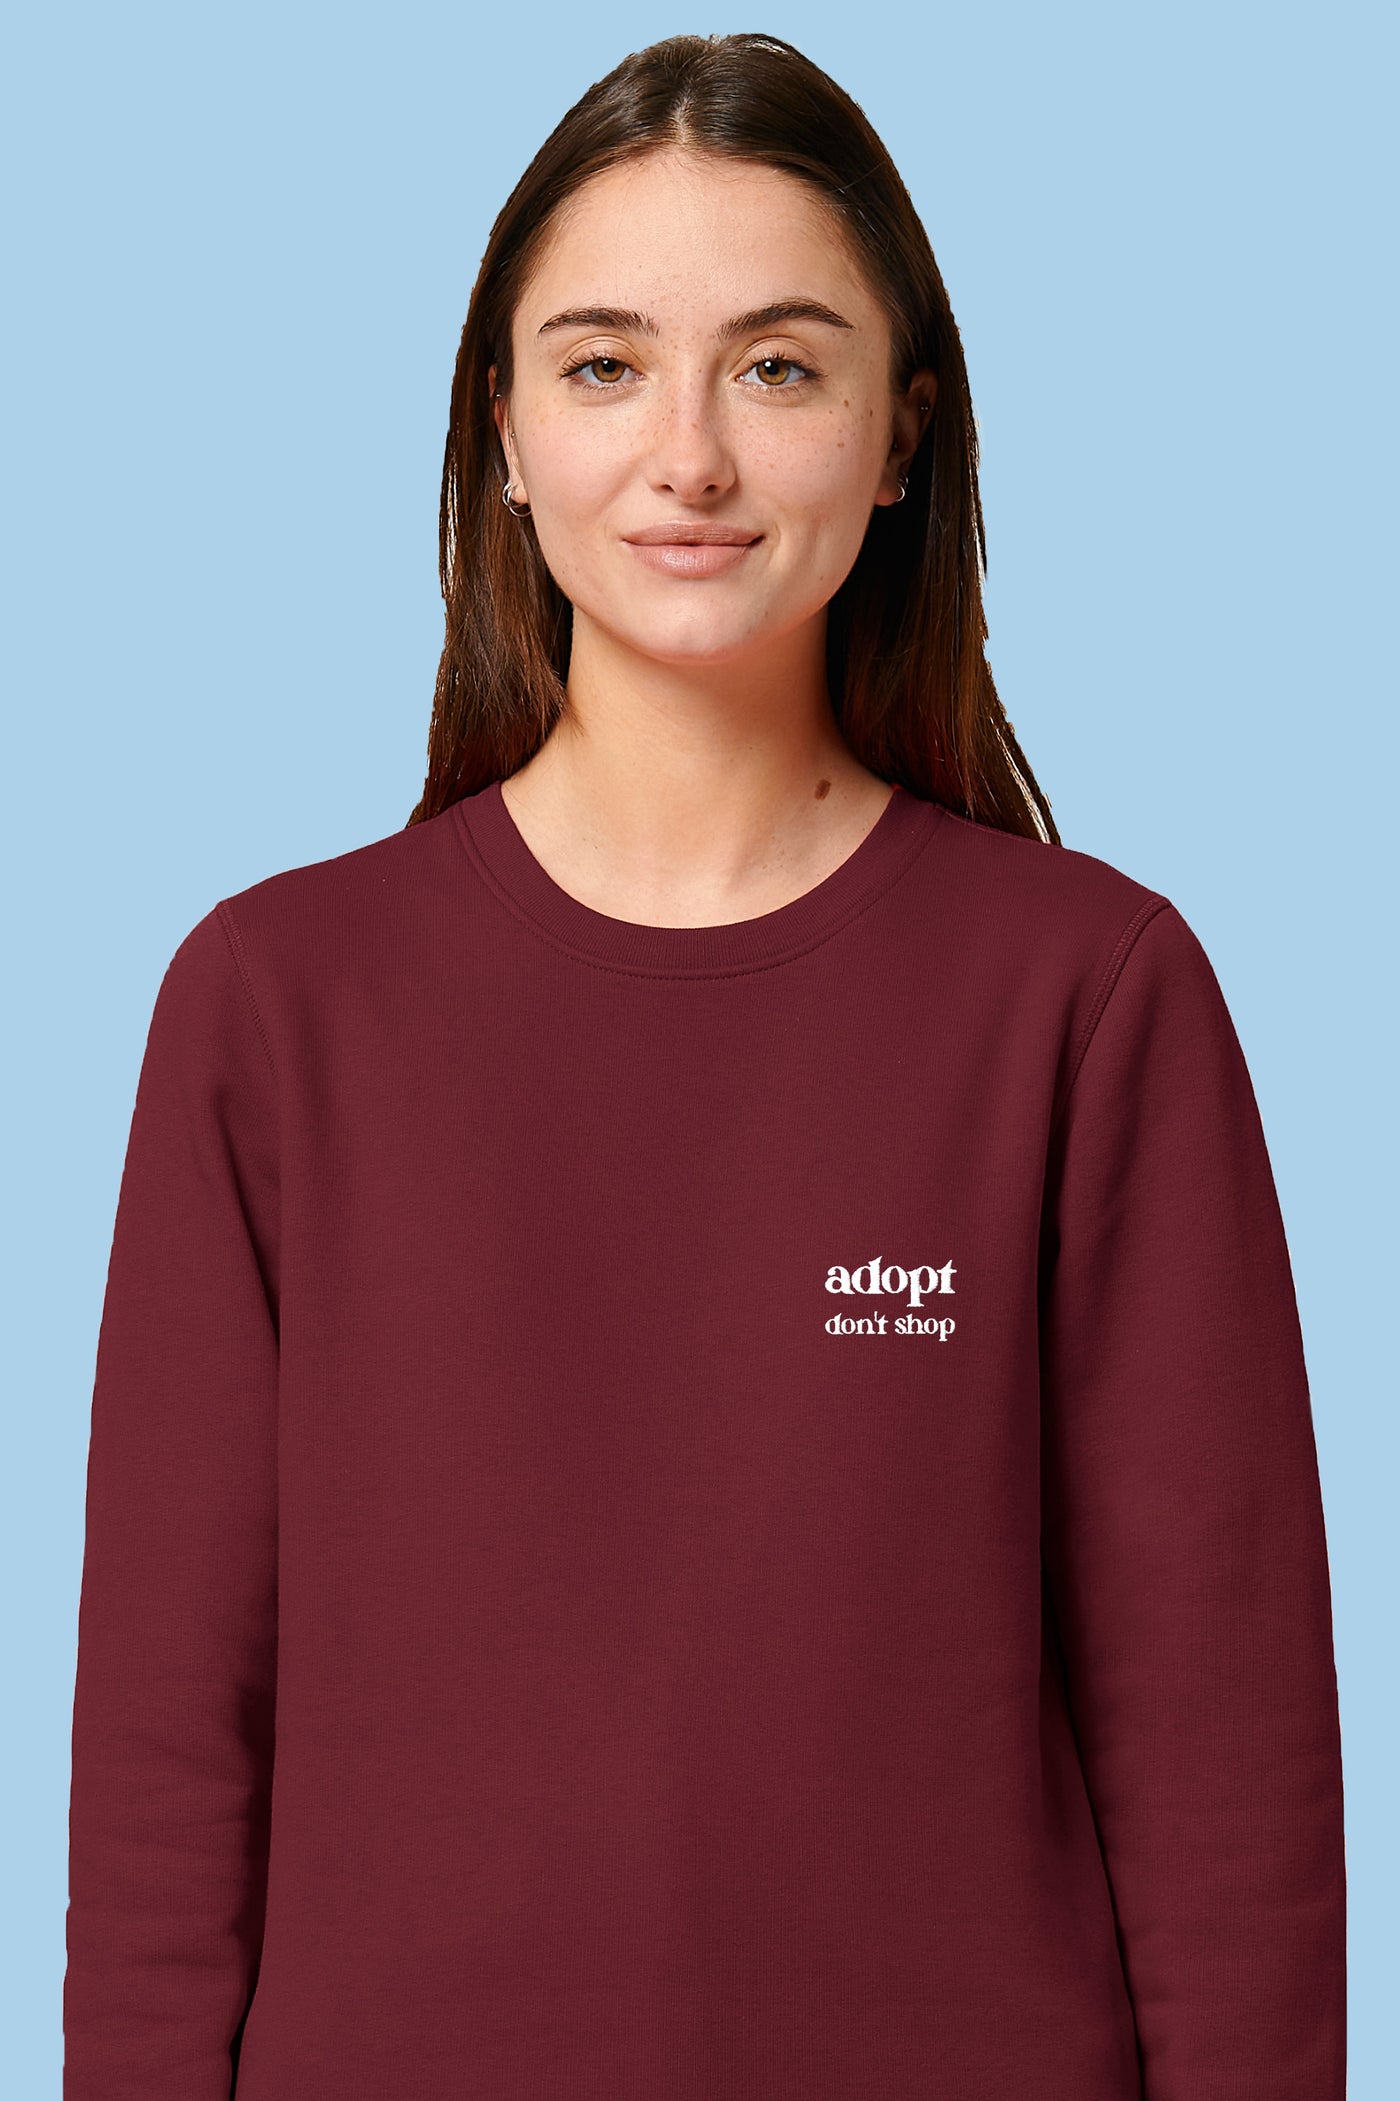 Adopt don't shop | Sweater